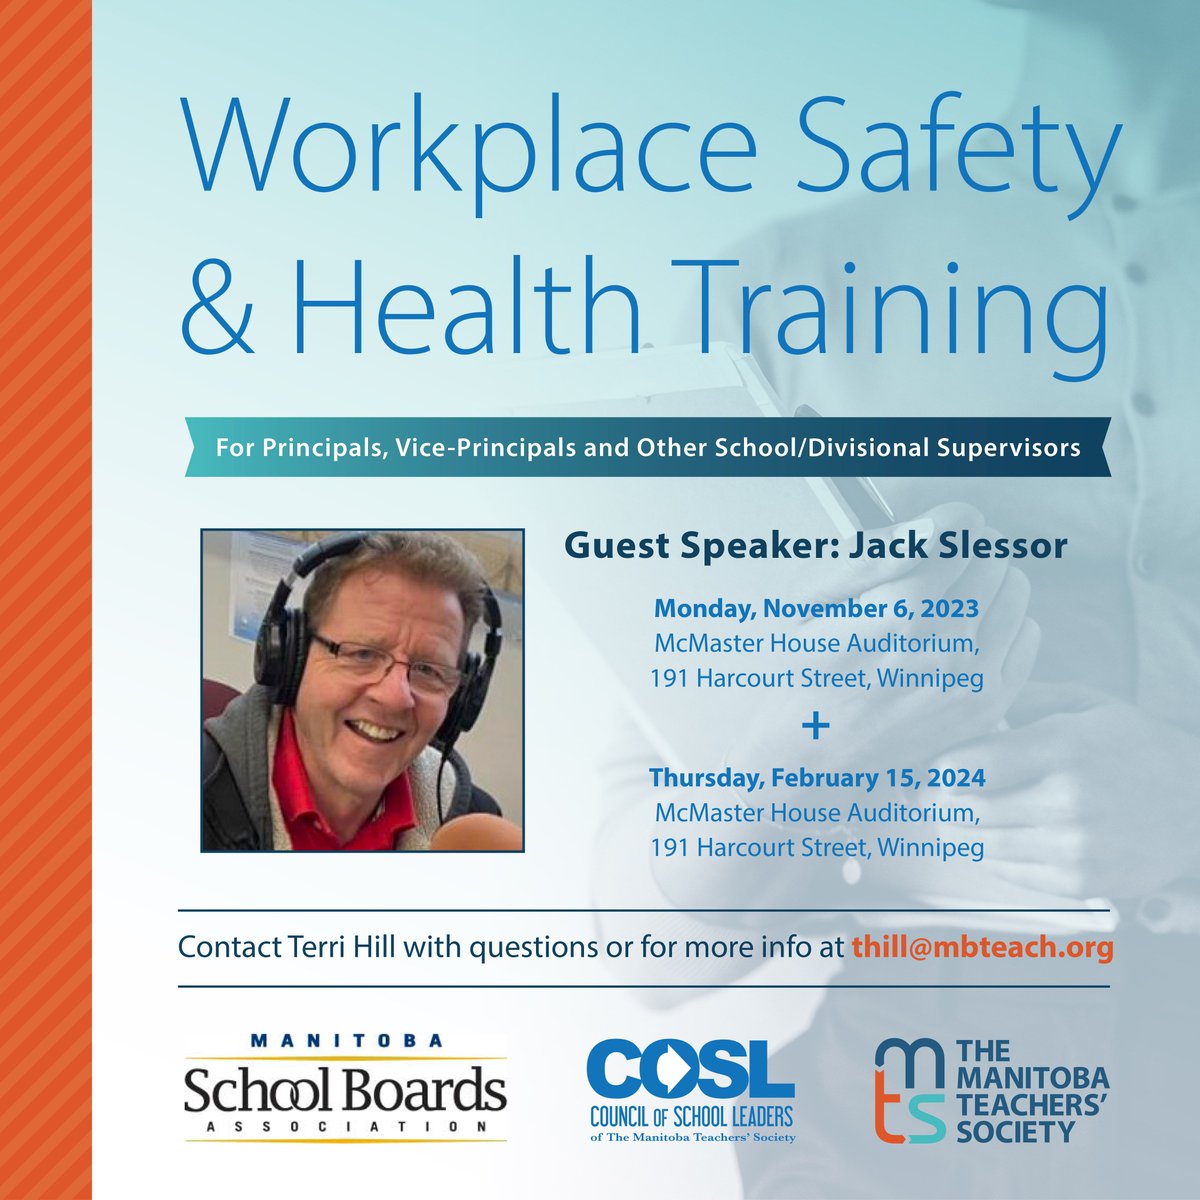 We've got you covered! This one-day workshop trains principals, vice-principals, and other school/divisional supervisors in their Workplace Safety and Health responsibilities. Get the info you need. Register for Nov. 6 or Feb. 15 now. buff.ly/492JiHW #MTSLearning